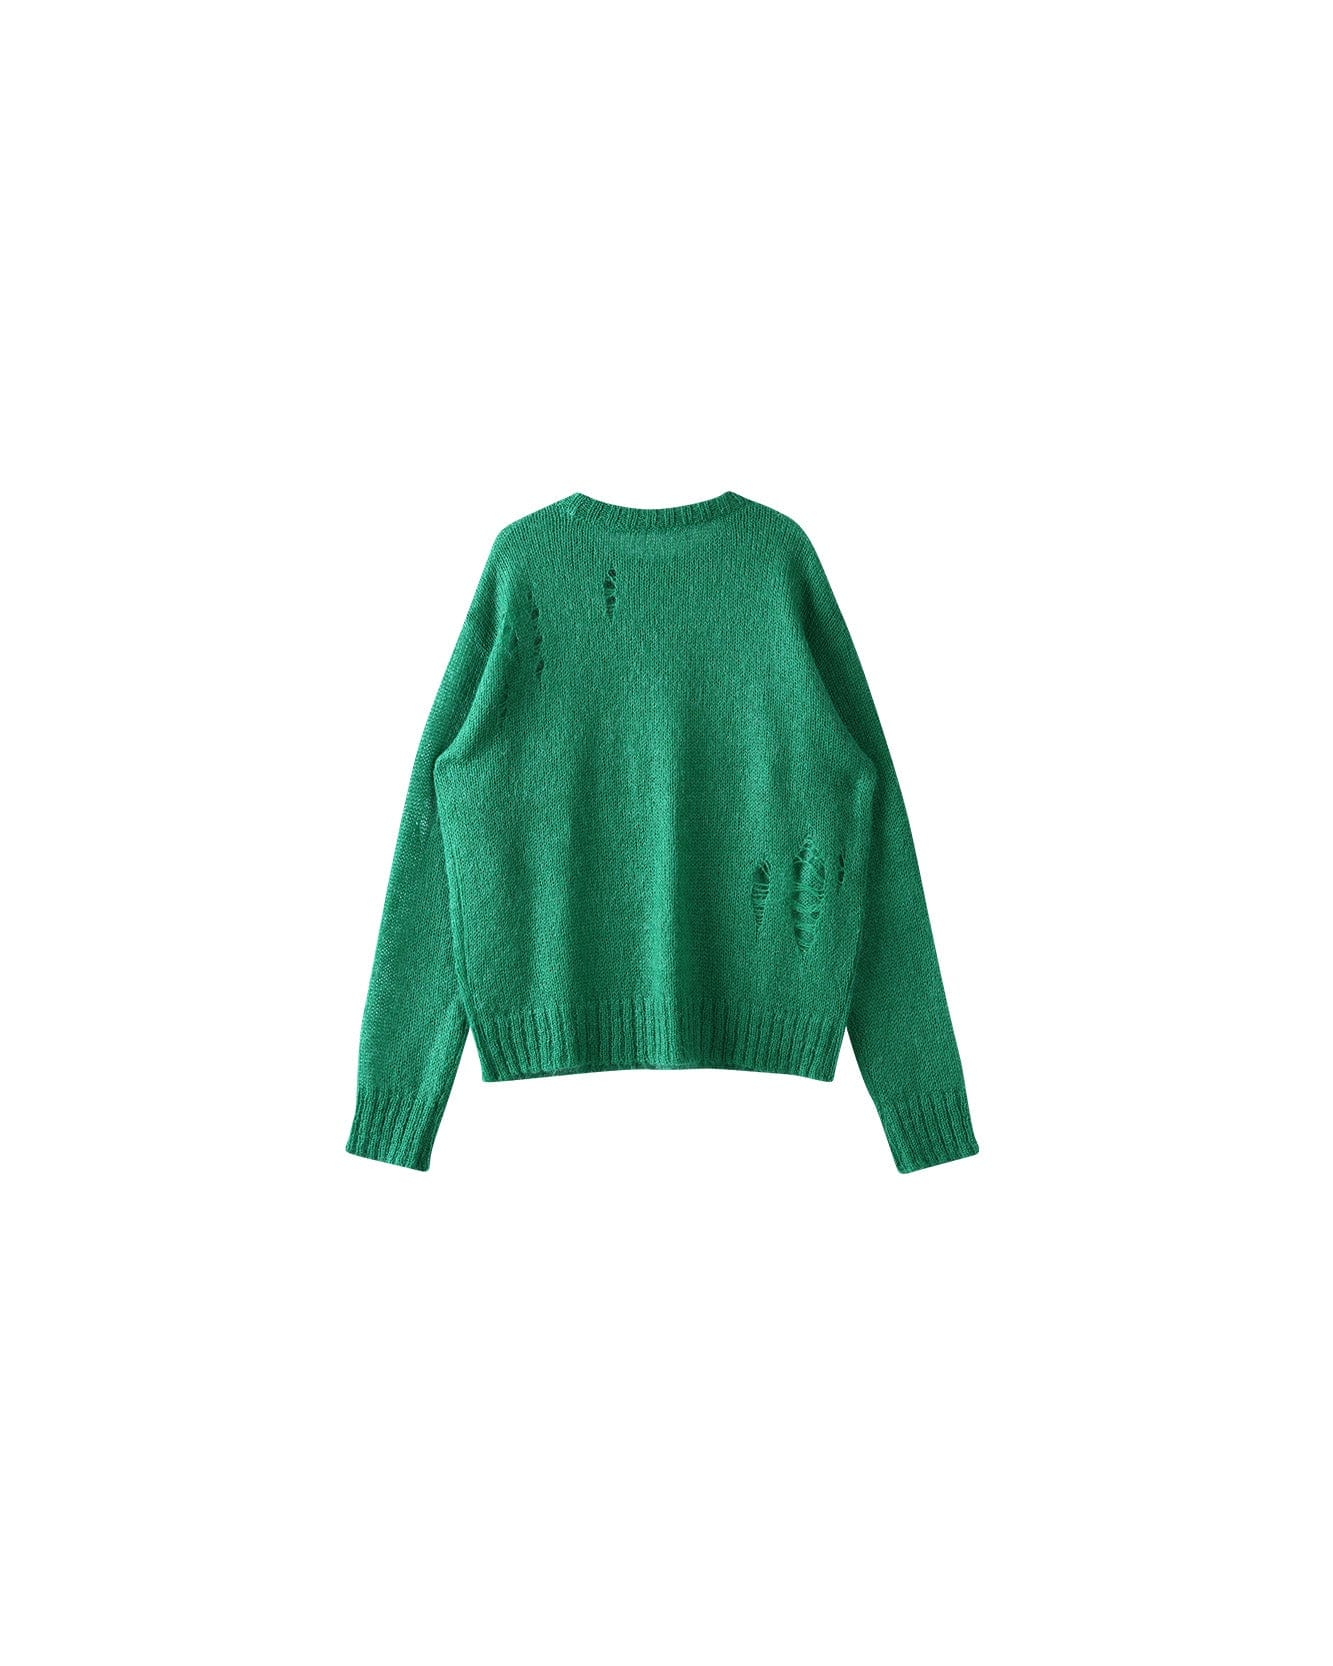 ESSENTIAL) ADSB KID MOHAIR CREW-NECK SWEATER atb1038m(GREEN